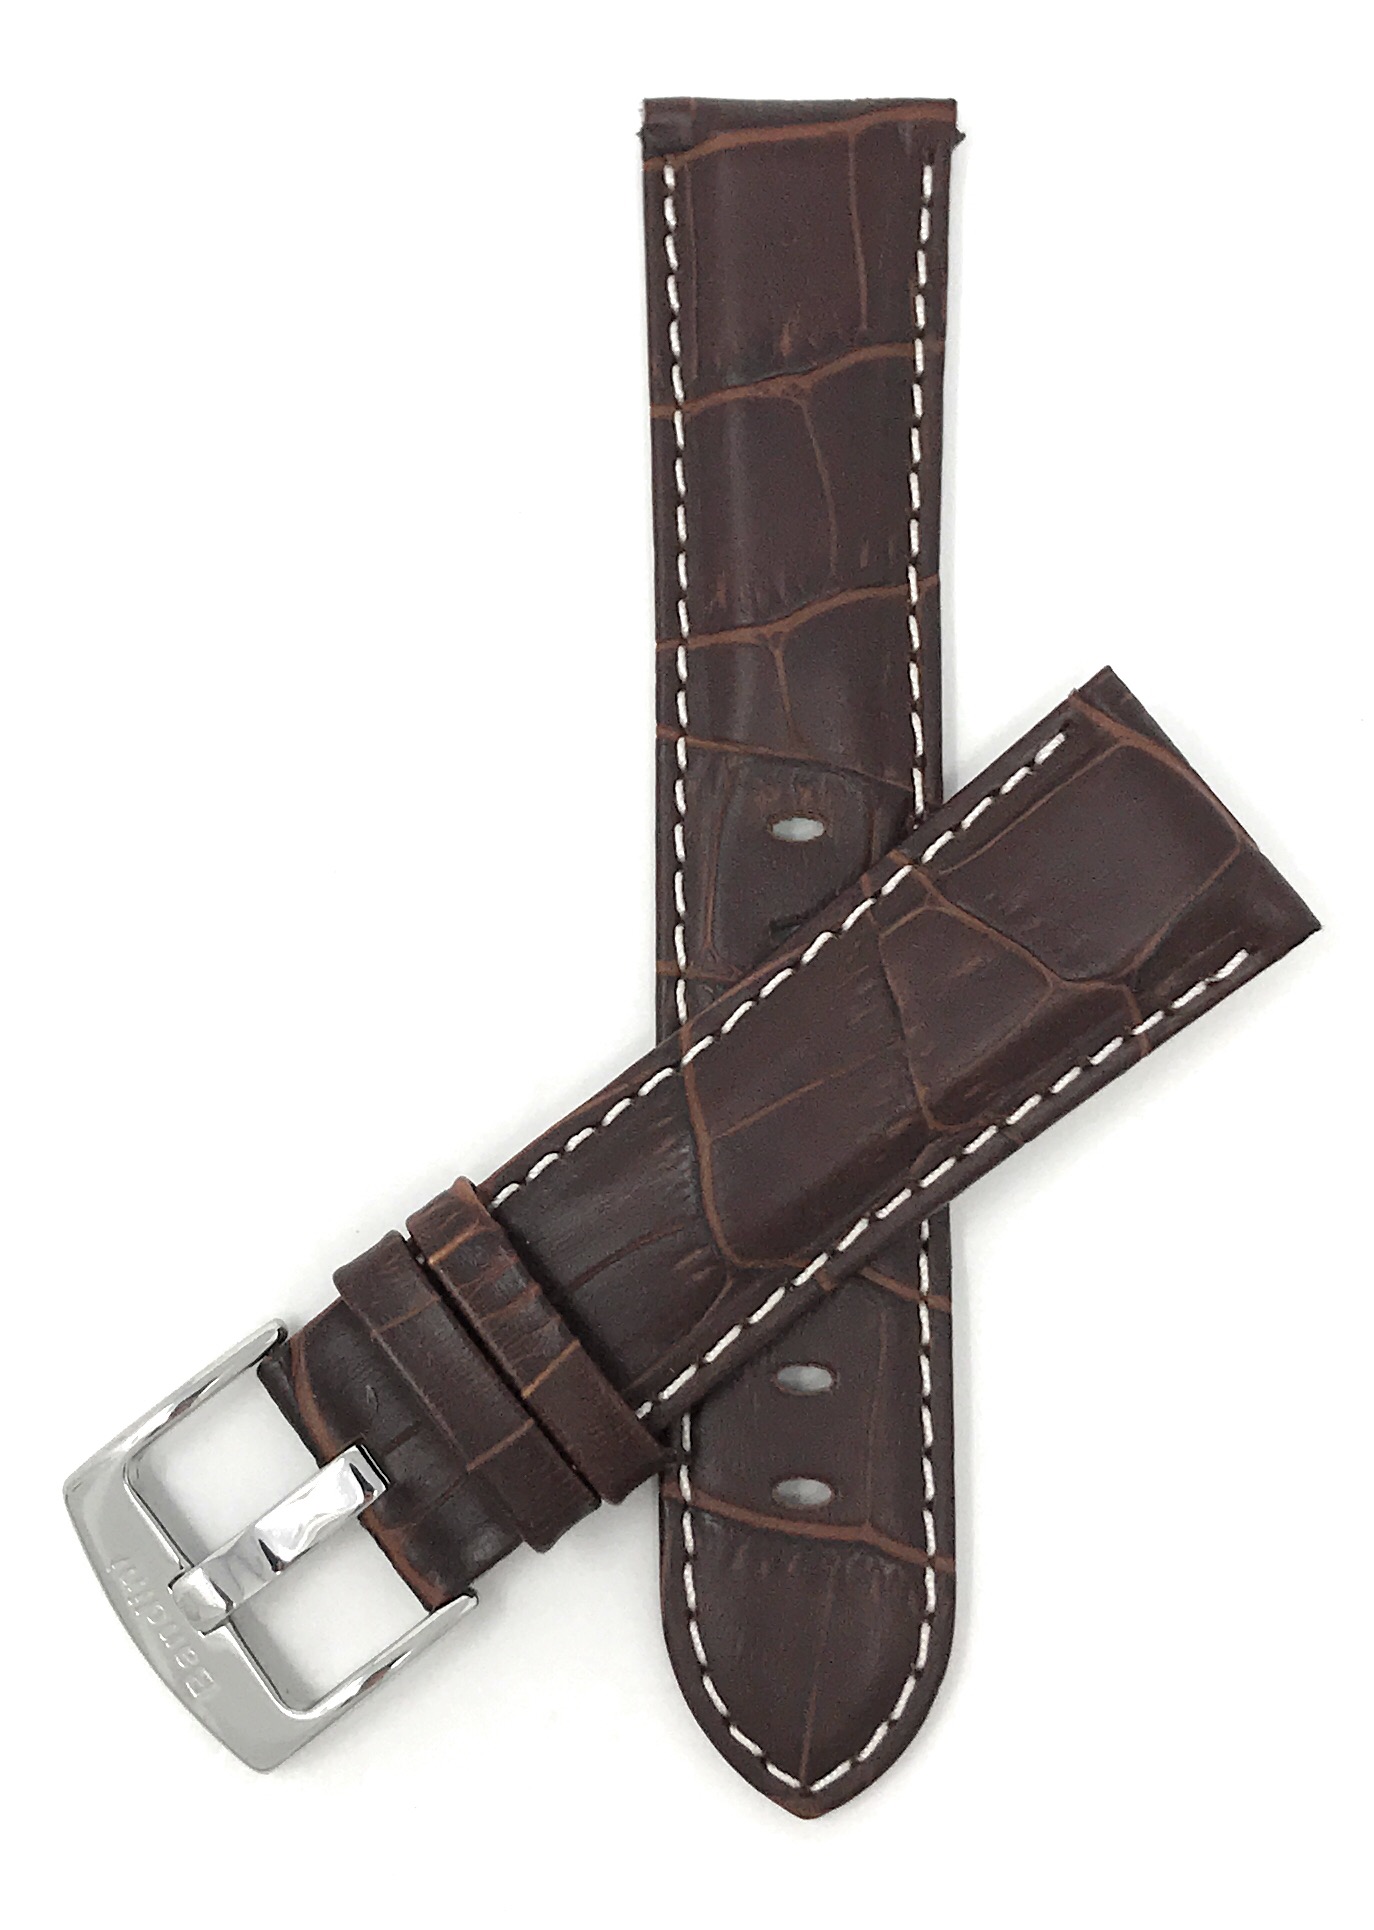 Bandini Mens Watch Band, Alligator Style, Leather Strap, 18mm - 26mm ...